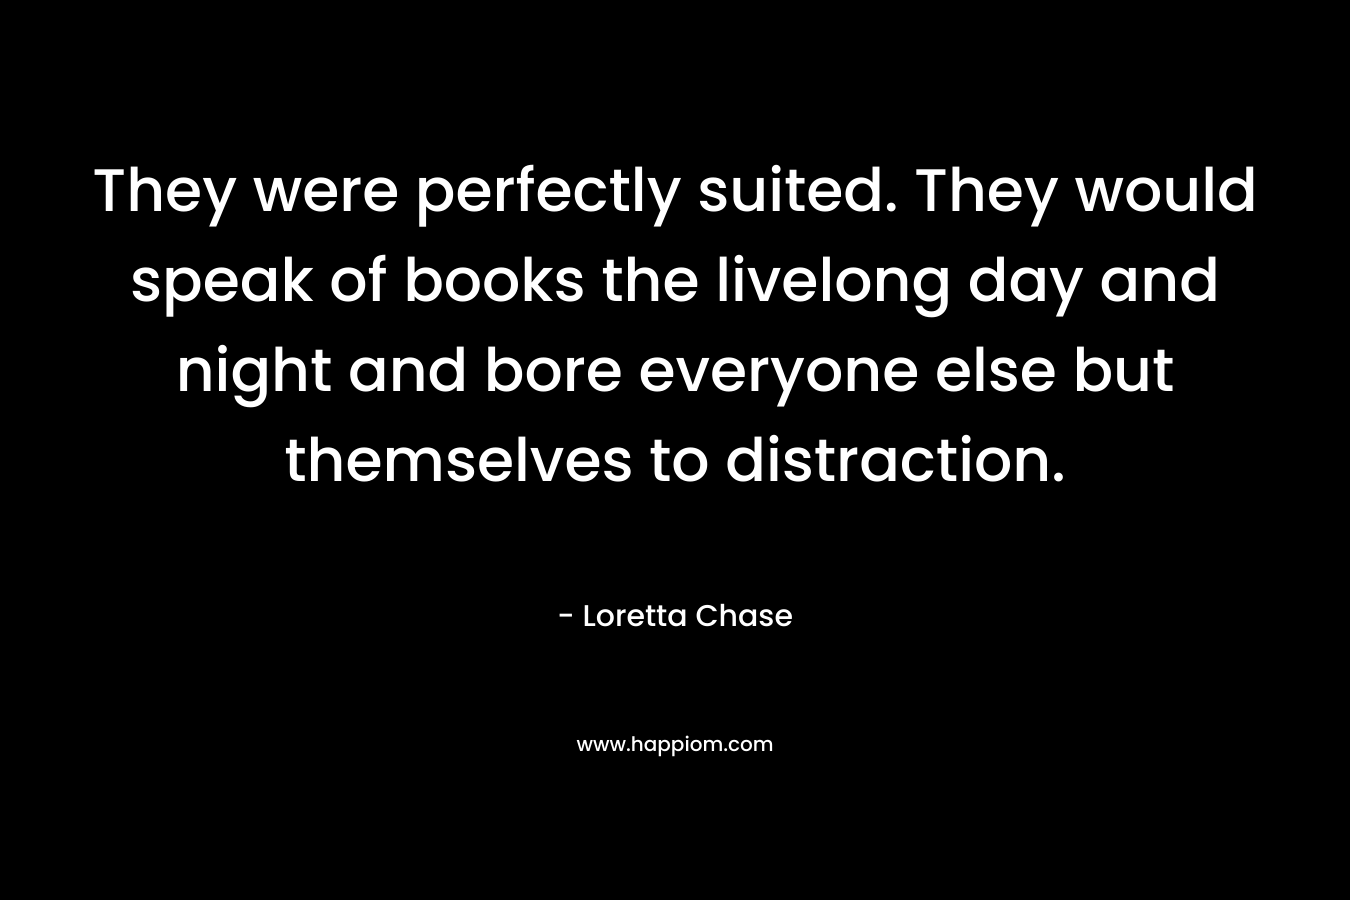 They were perfectly suited. They would speak of books the livelong day and night and bore everyone else but themselves to distraction. – Loretta Chase